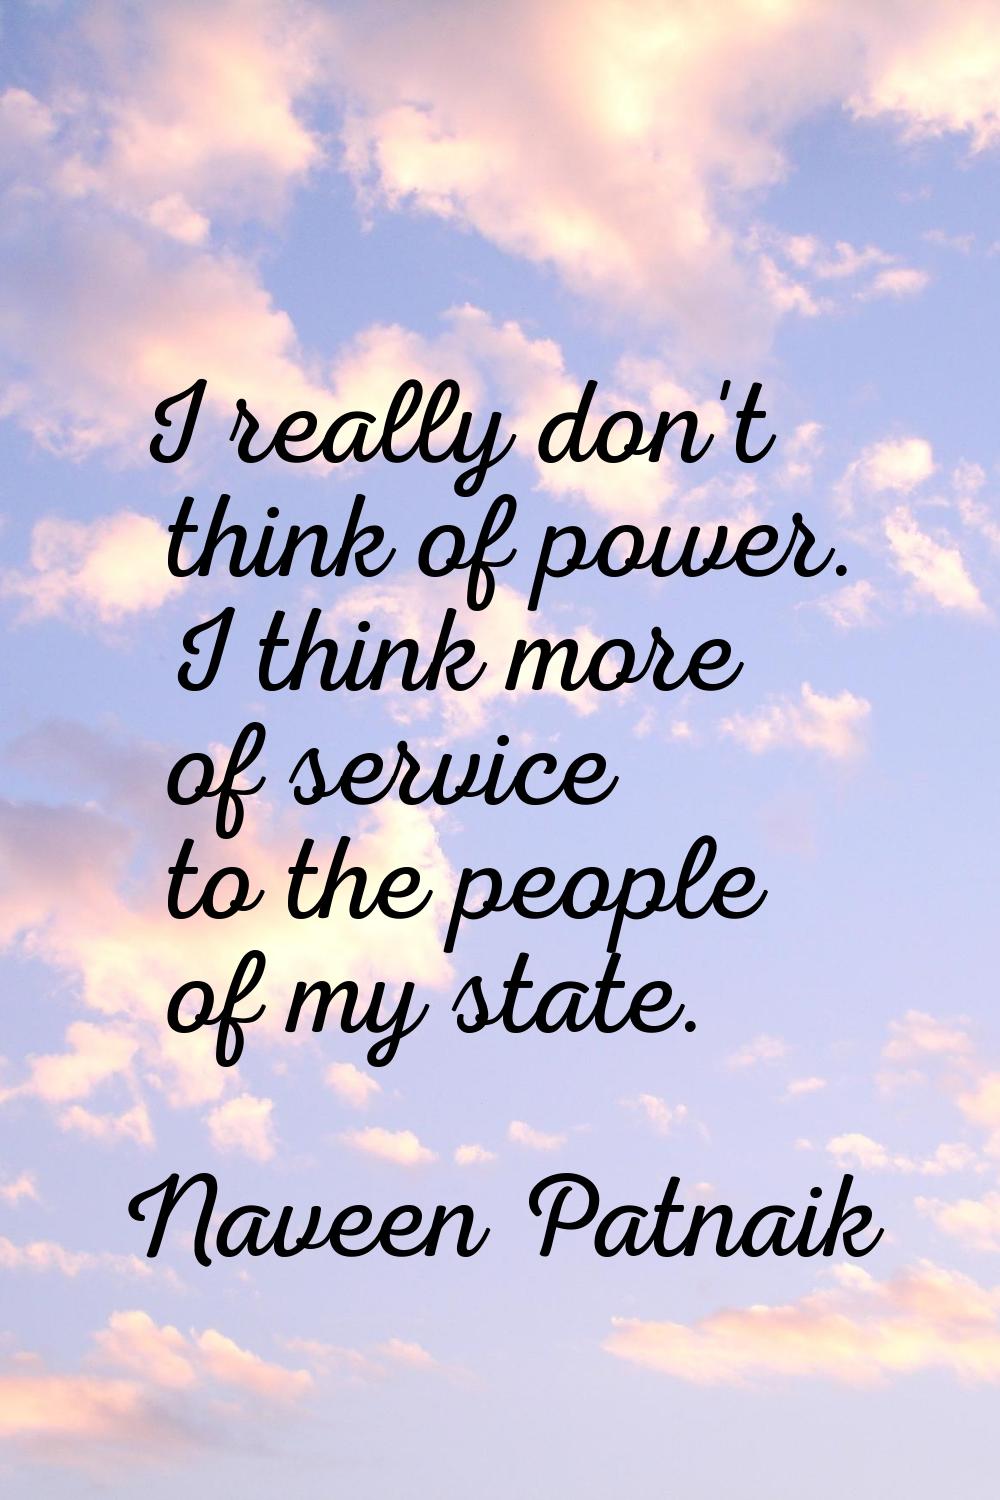 I really don't think of power. I think more of service to the people of my state.